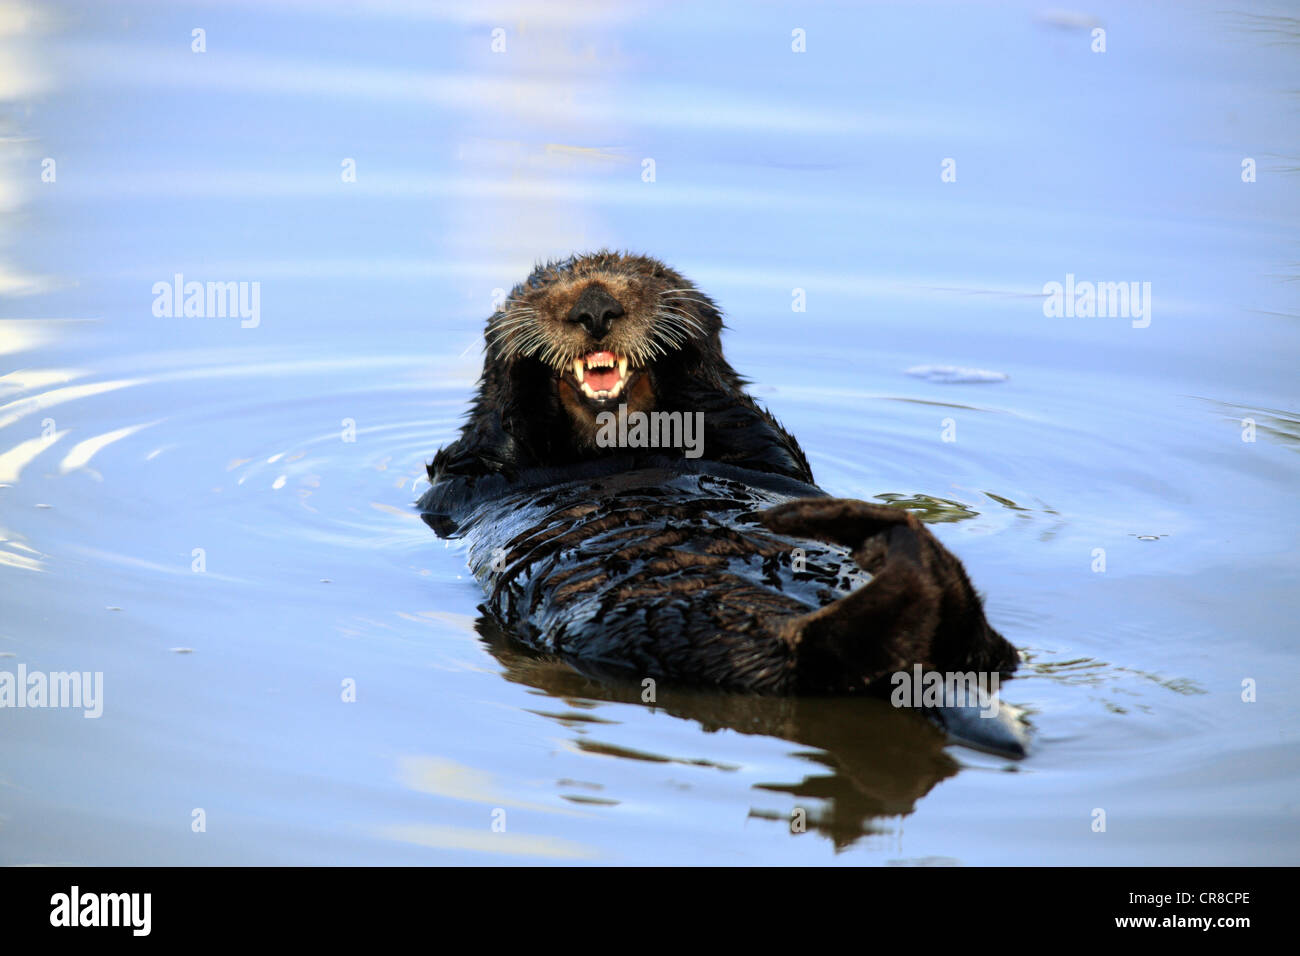 Sea otter (Enhydra lutris), adult, female, in the water, yawning, Monterey, California, USA Stock Photo